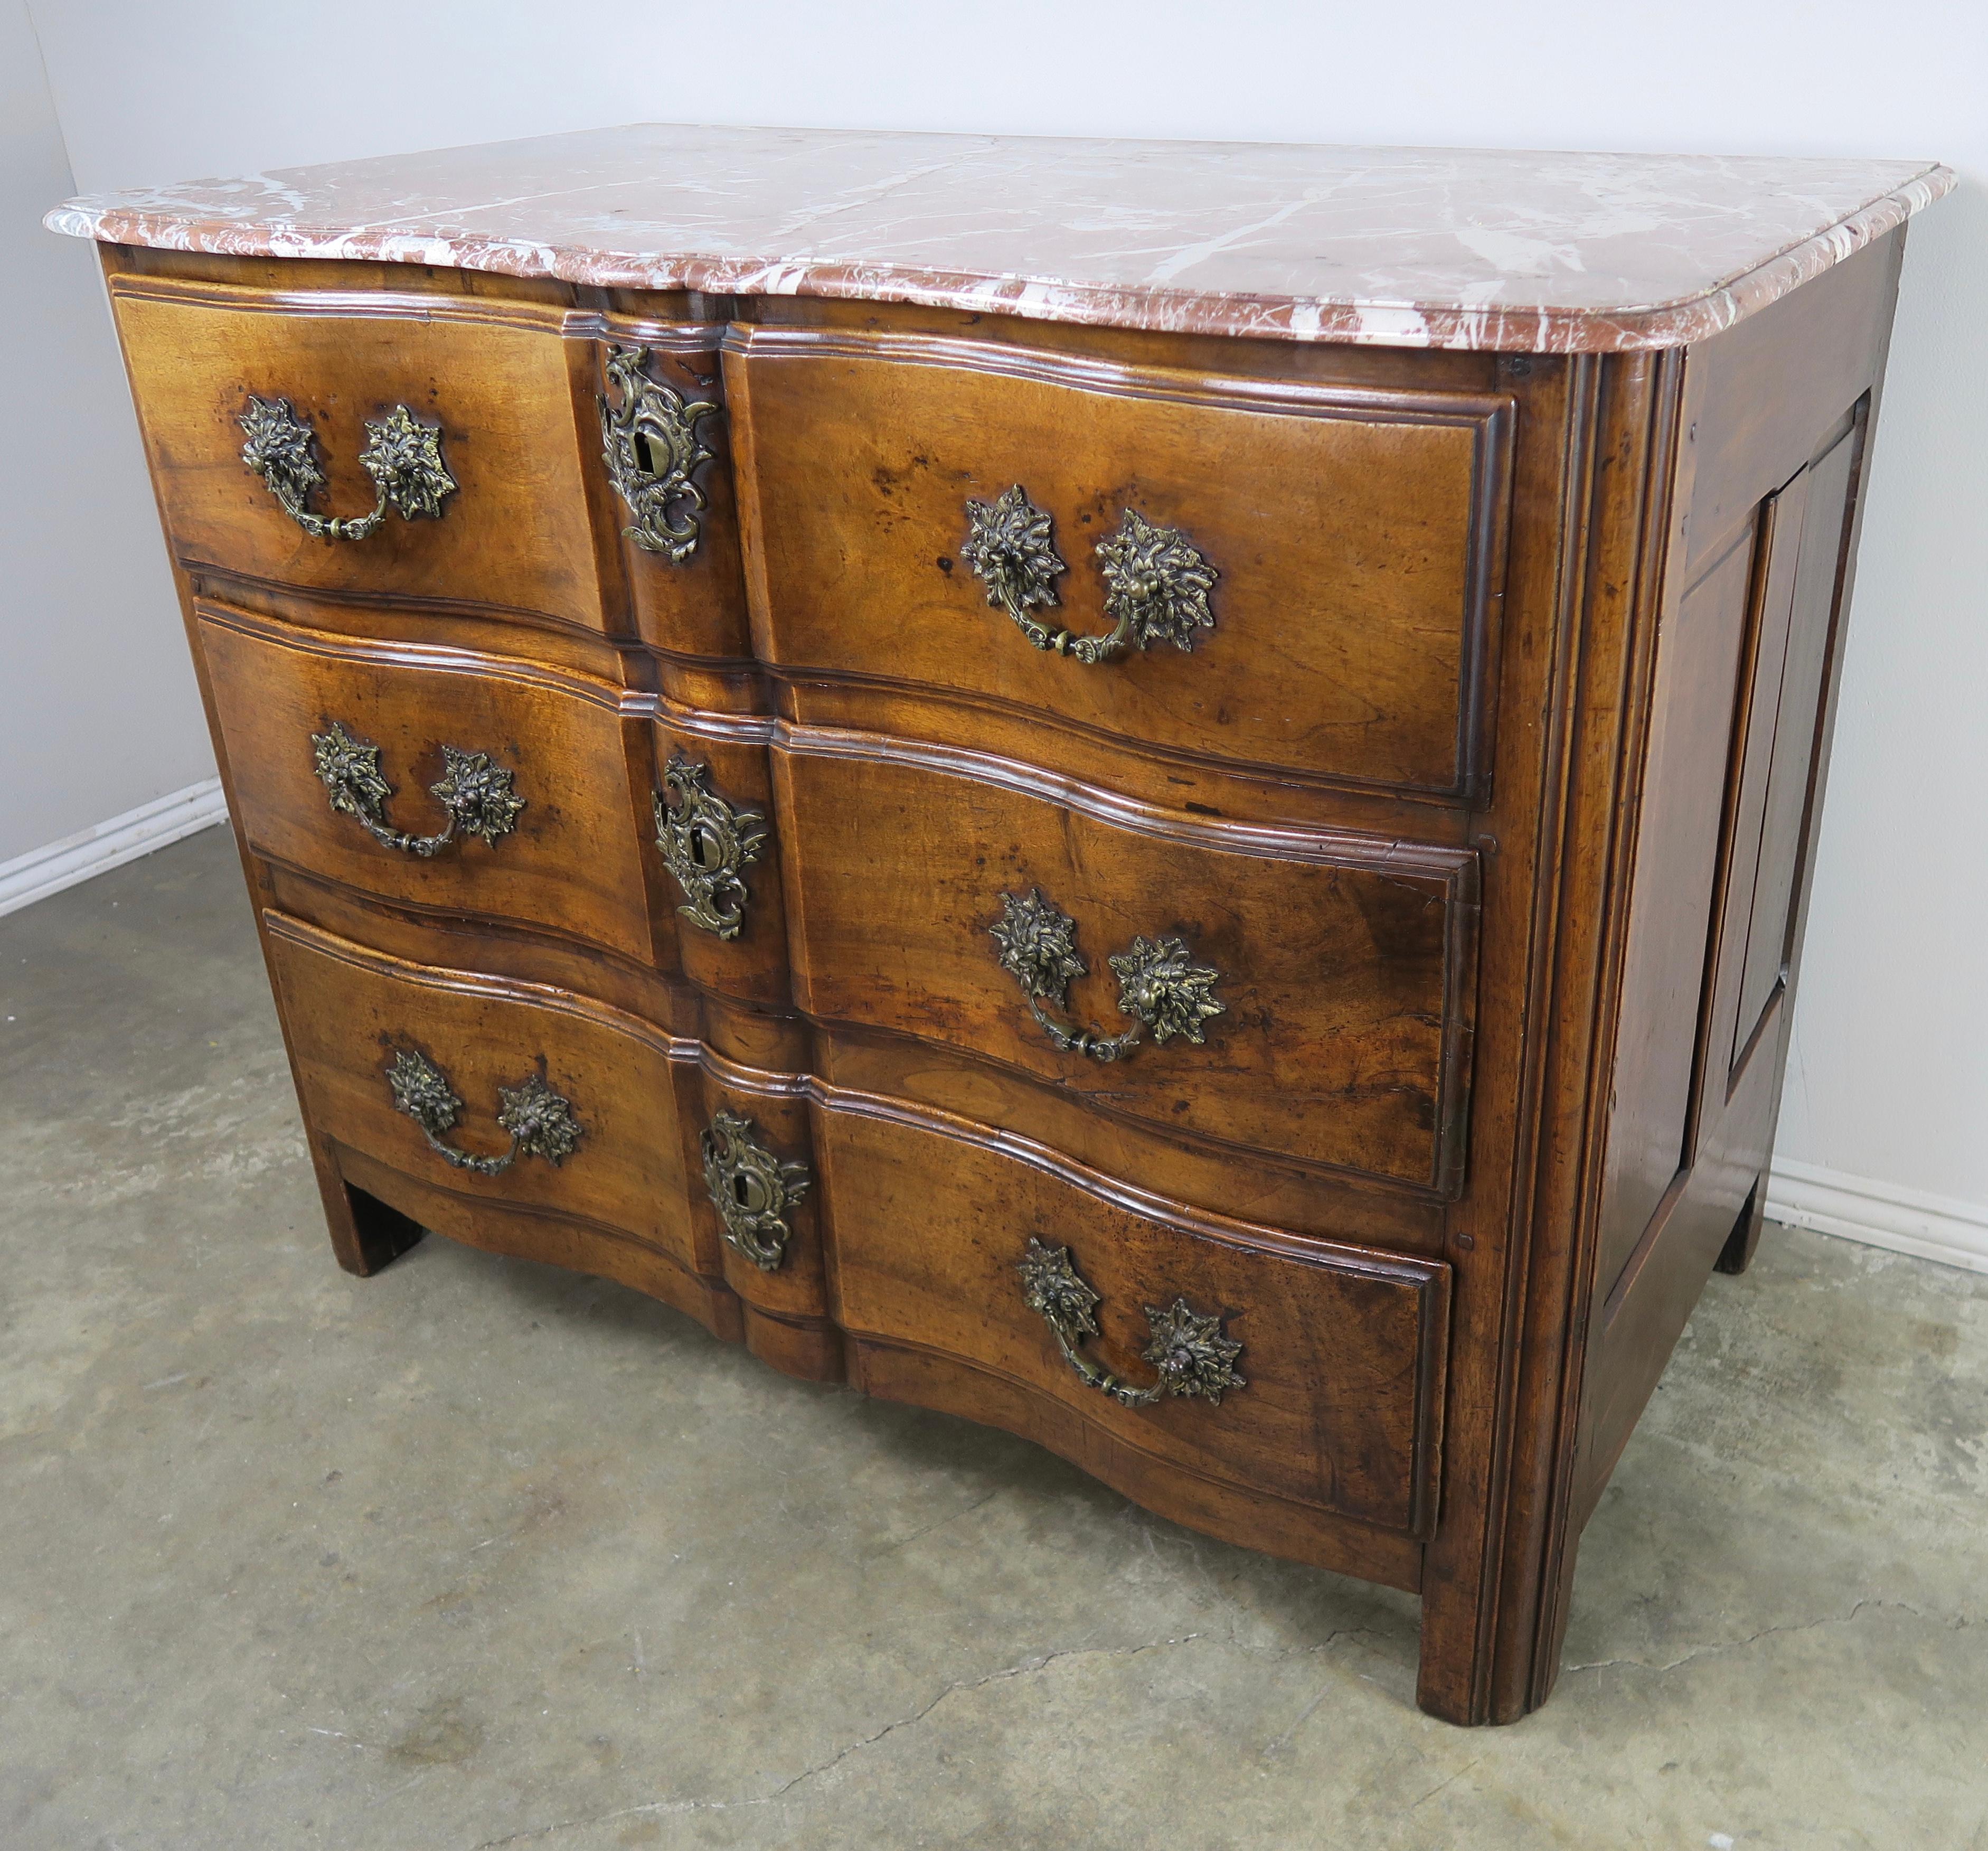 Walnut Early 19th Century French Louis XV Style Commode with Bronze Hardware